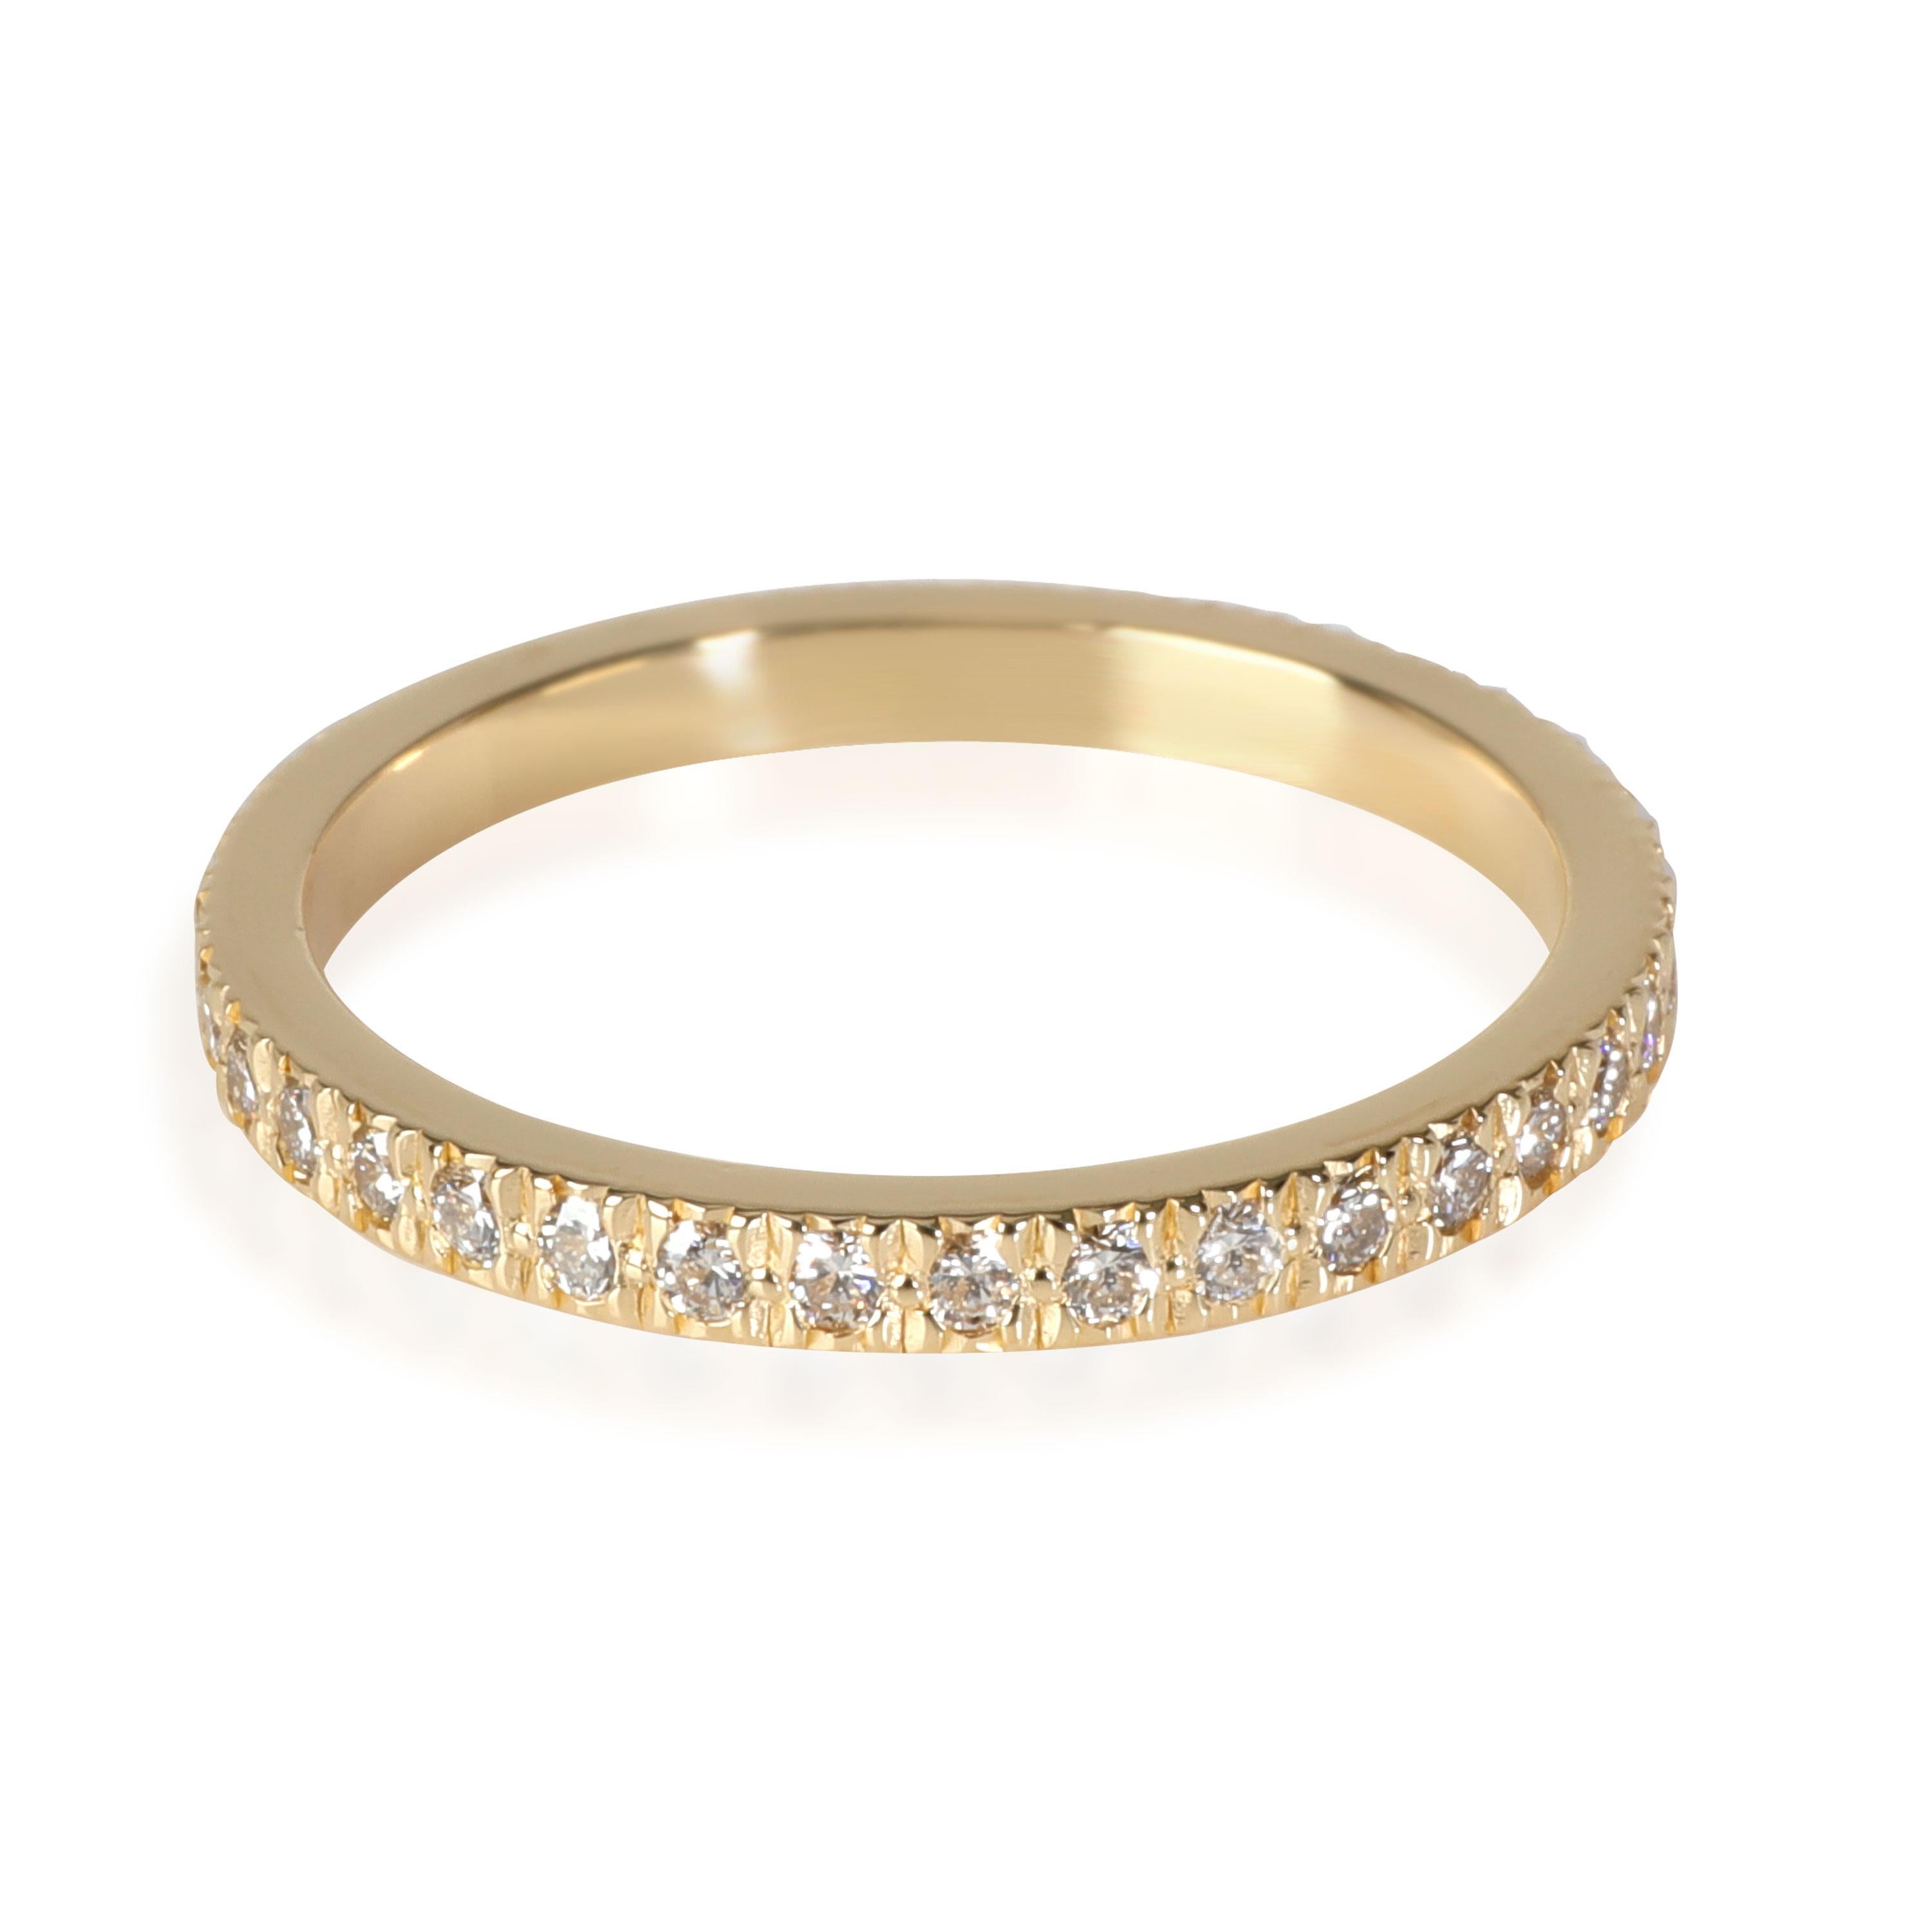 Tiffany & Co. Novo Diamond Eternity Band in 18k Yellow Gold 0.20 CTW

PRIMARY DETAILS
SKU: 116434
Listing Title: Tiffany & Co. Novo Diamond Eternity Band in 18k Yellow Gold 0.20 CTW
Condition Description: Retails for 3600 USD. In excellent condition